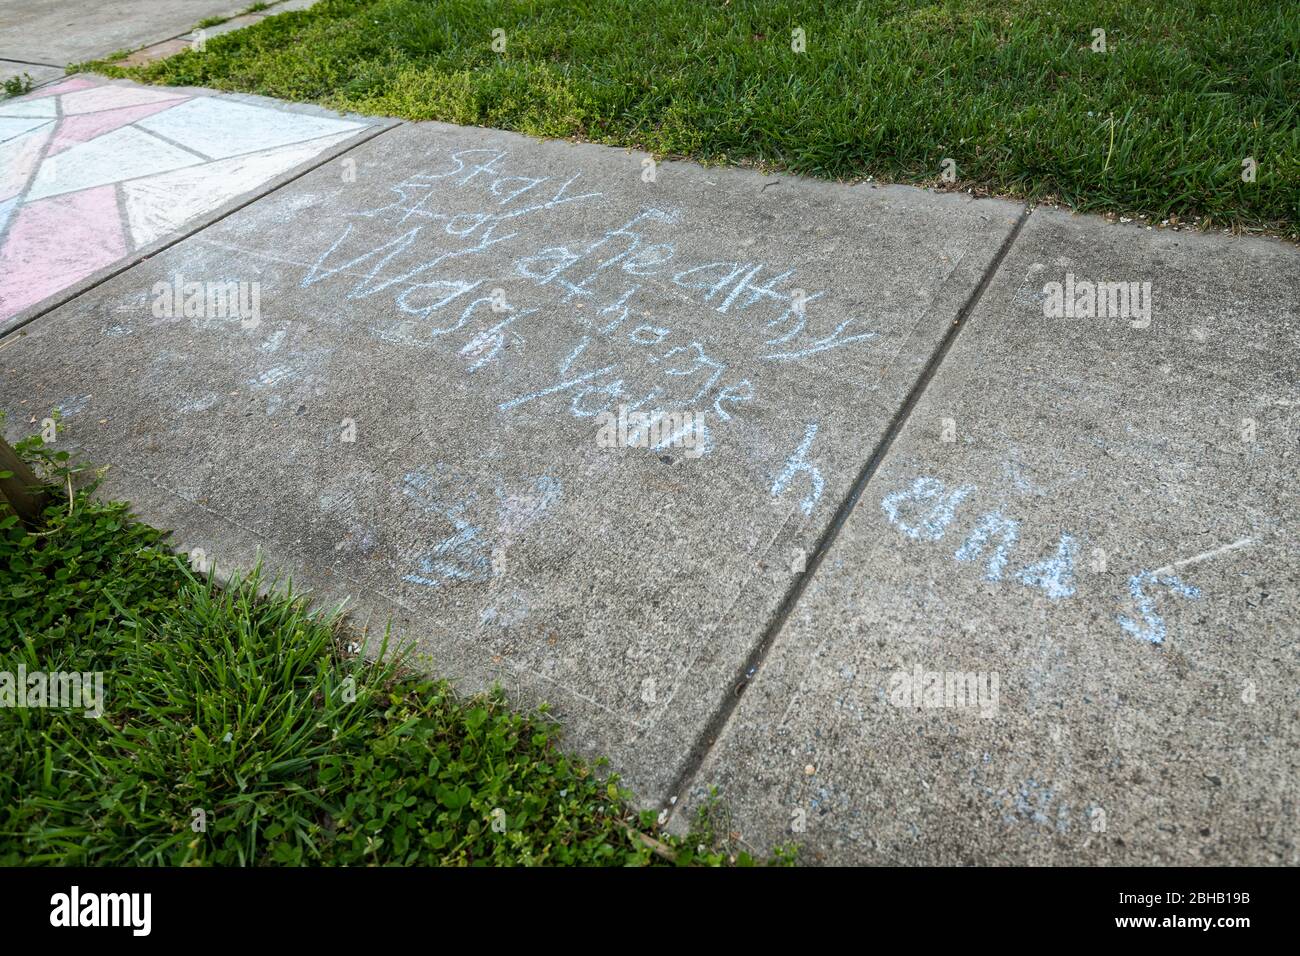 Children's messages written in sidewalk chalk reminding people to wash their hands during the Covid-19 Pandemic. Stock Photo